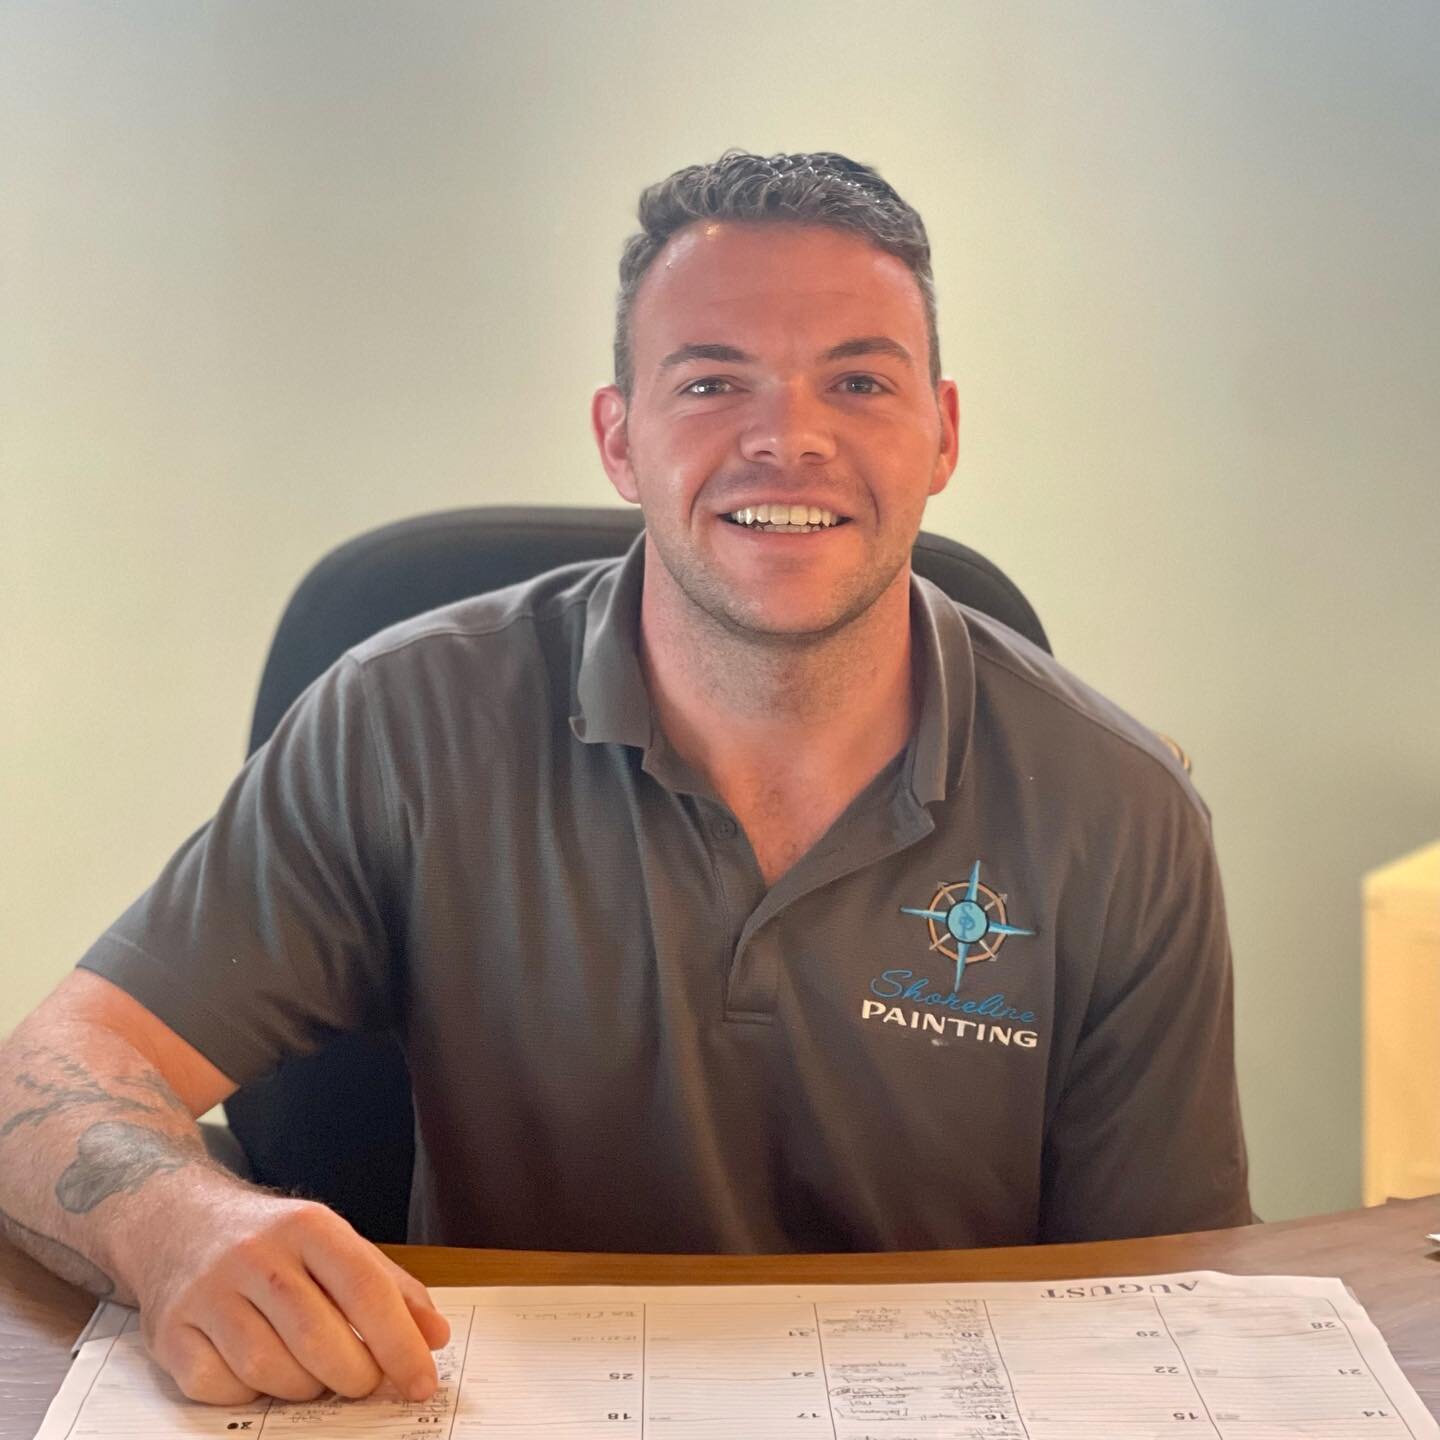 #Meettheteam

Happy Saturday everyone! 

We would like to introduce Shoreline Painting&rsquo;s Project manager, Ben!

Ben started with Shoreline a few years back as a painter with some experience in the field, but also came with years of management a